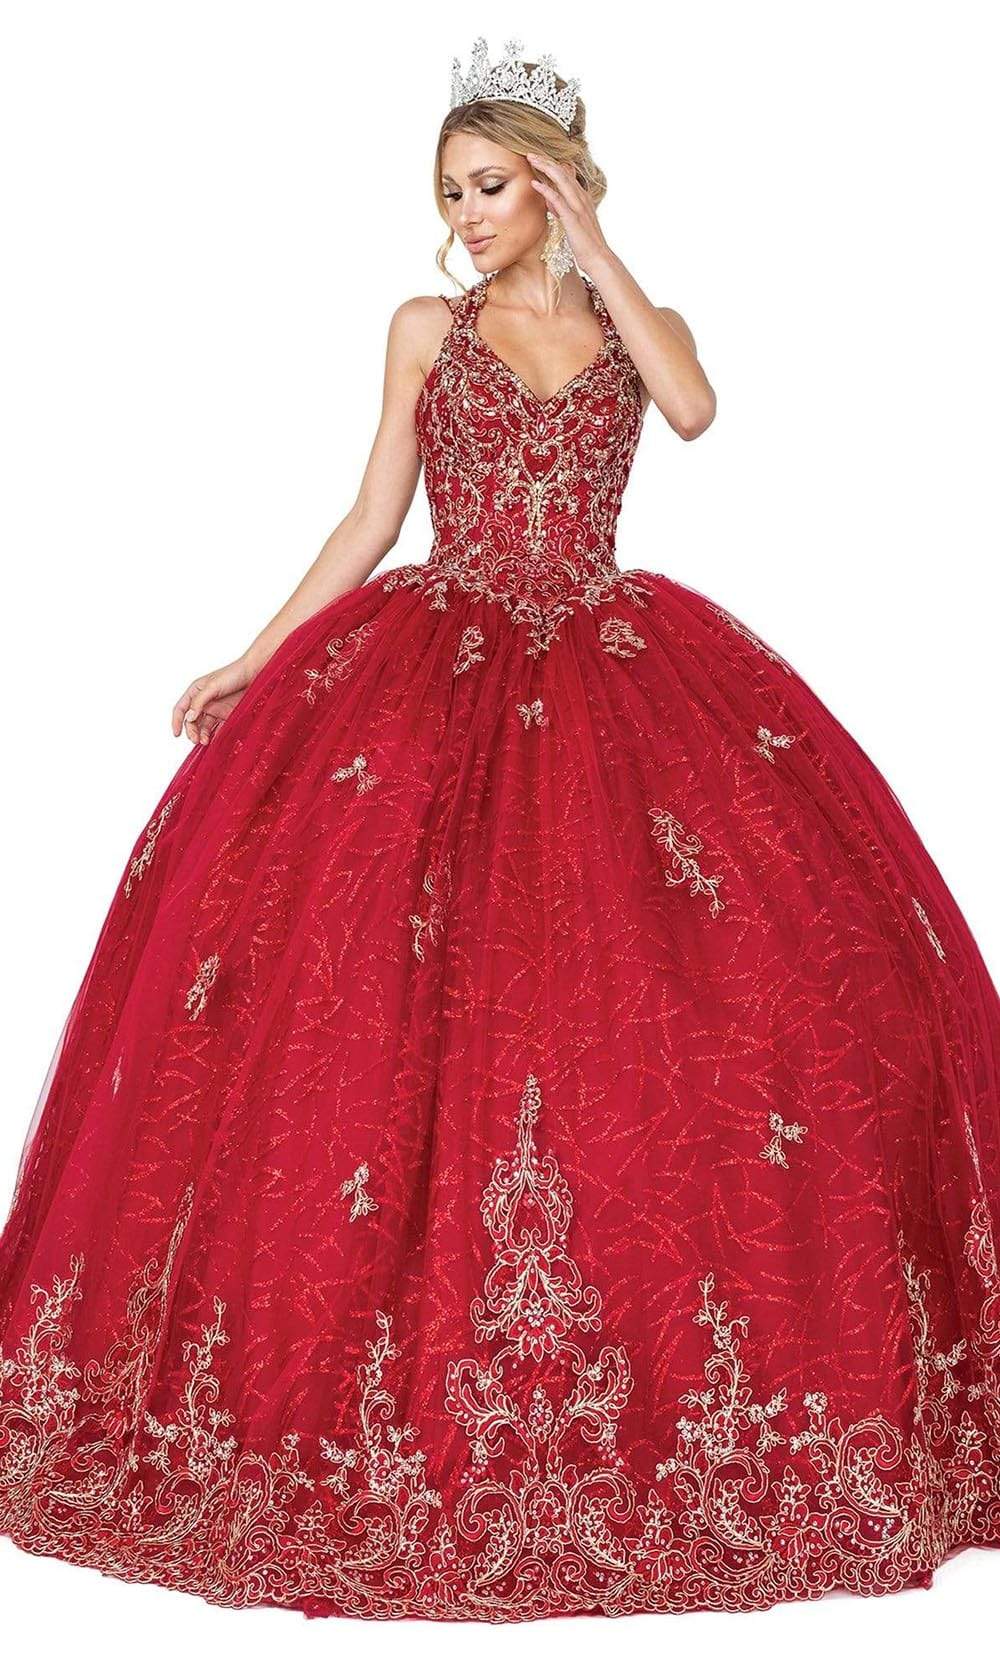 Dancing Queen - 1609 Appliqued Strappy Ballgown Special Occasion Dress XS / Burgundy